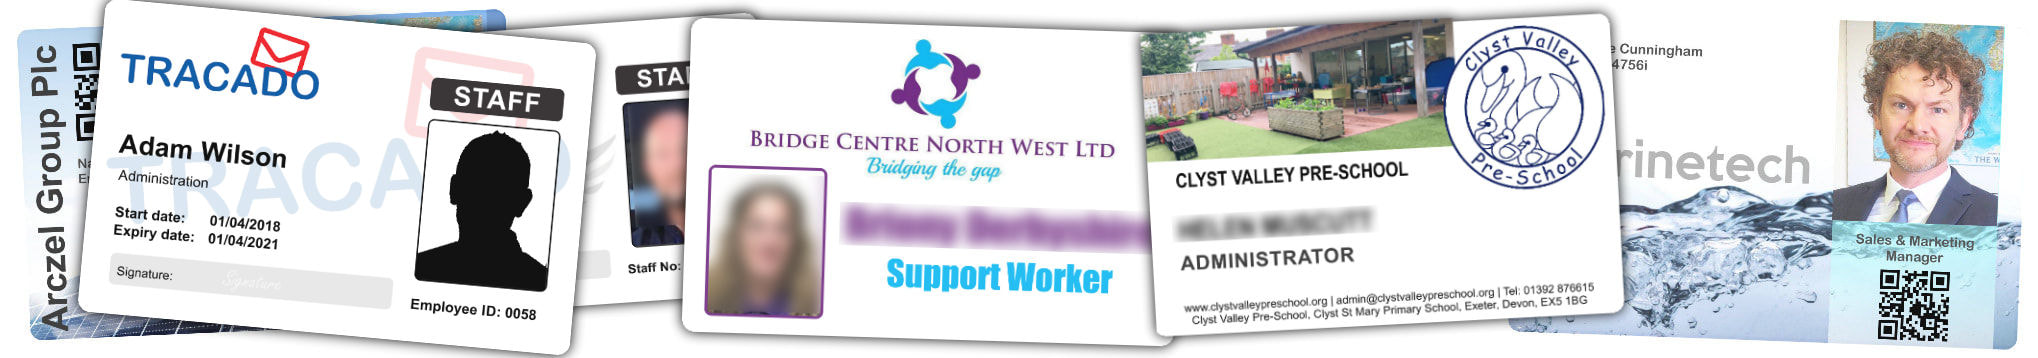 St Helens examples of staff photo ID cards | samples of employee Identity card printing | Workers ID cards printed in 